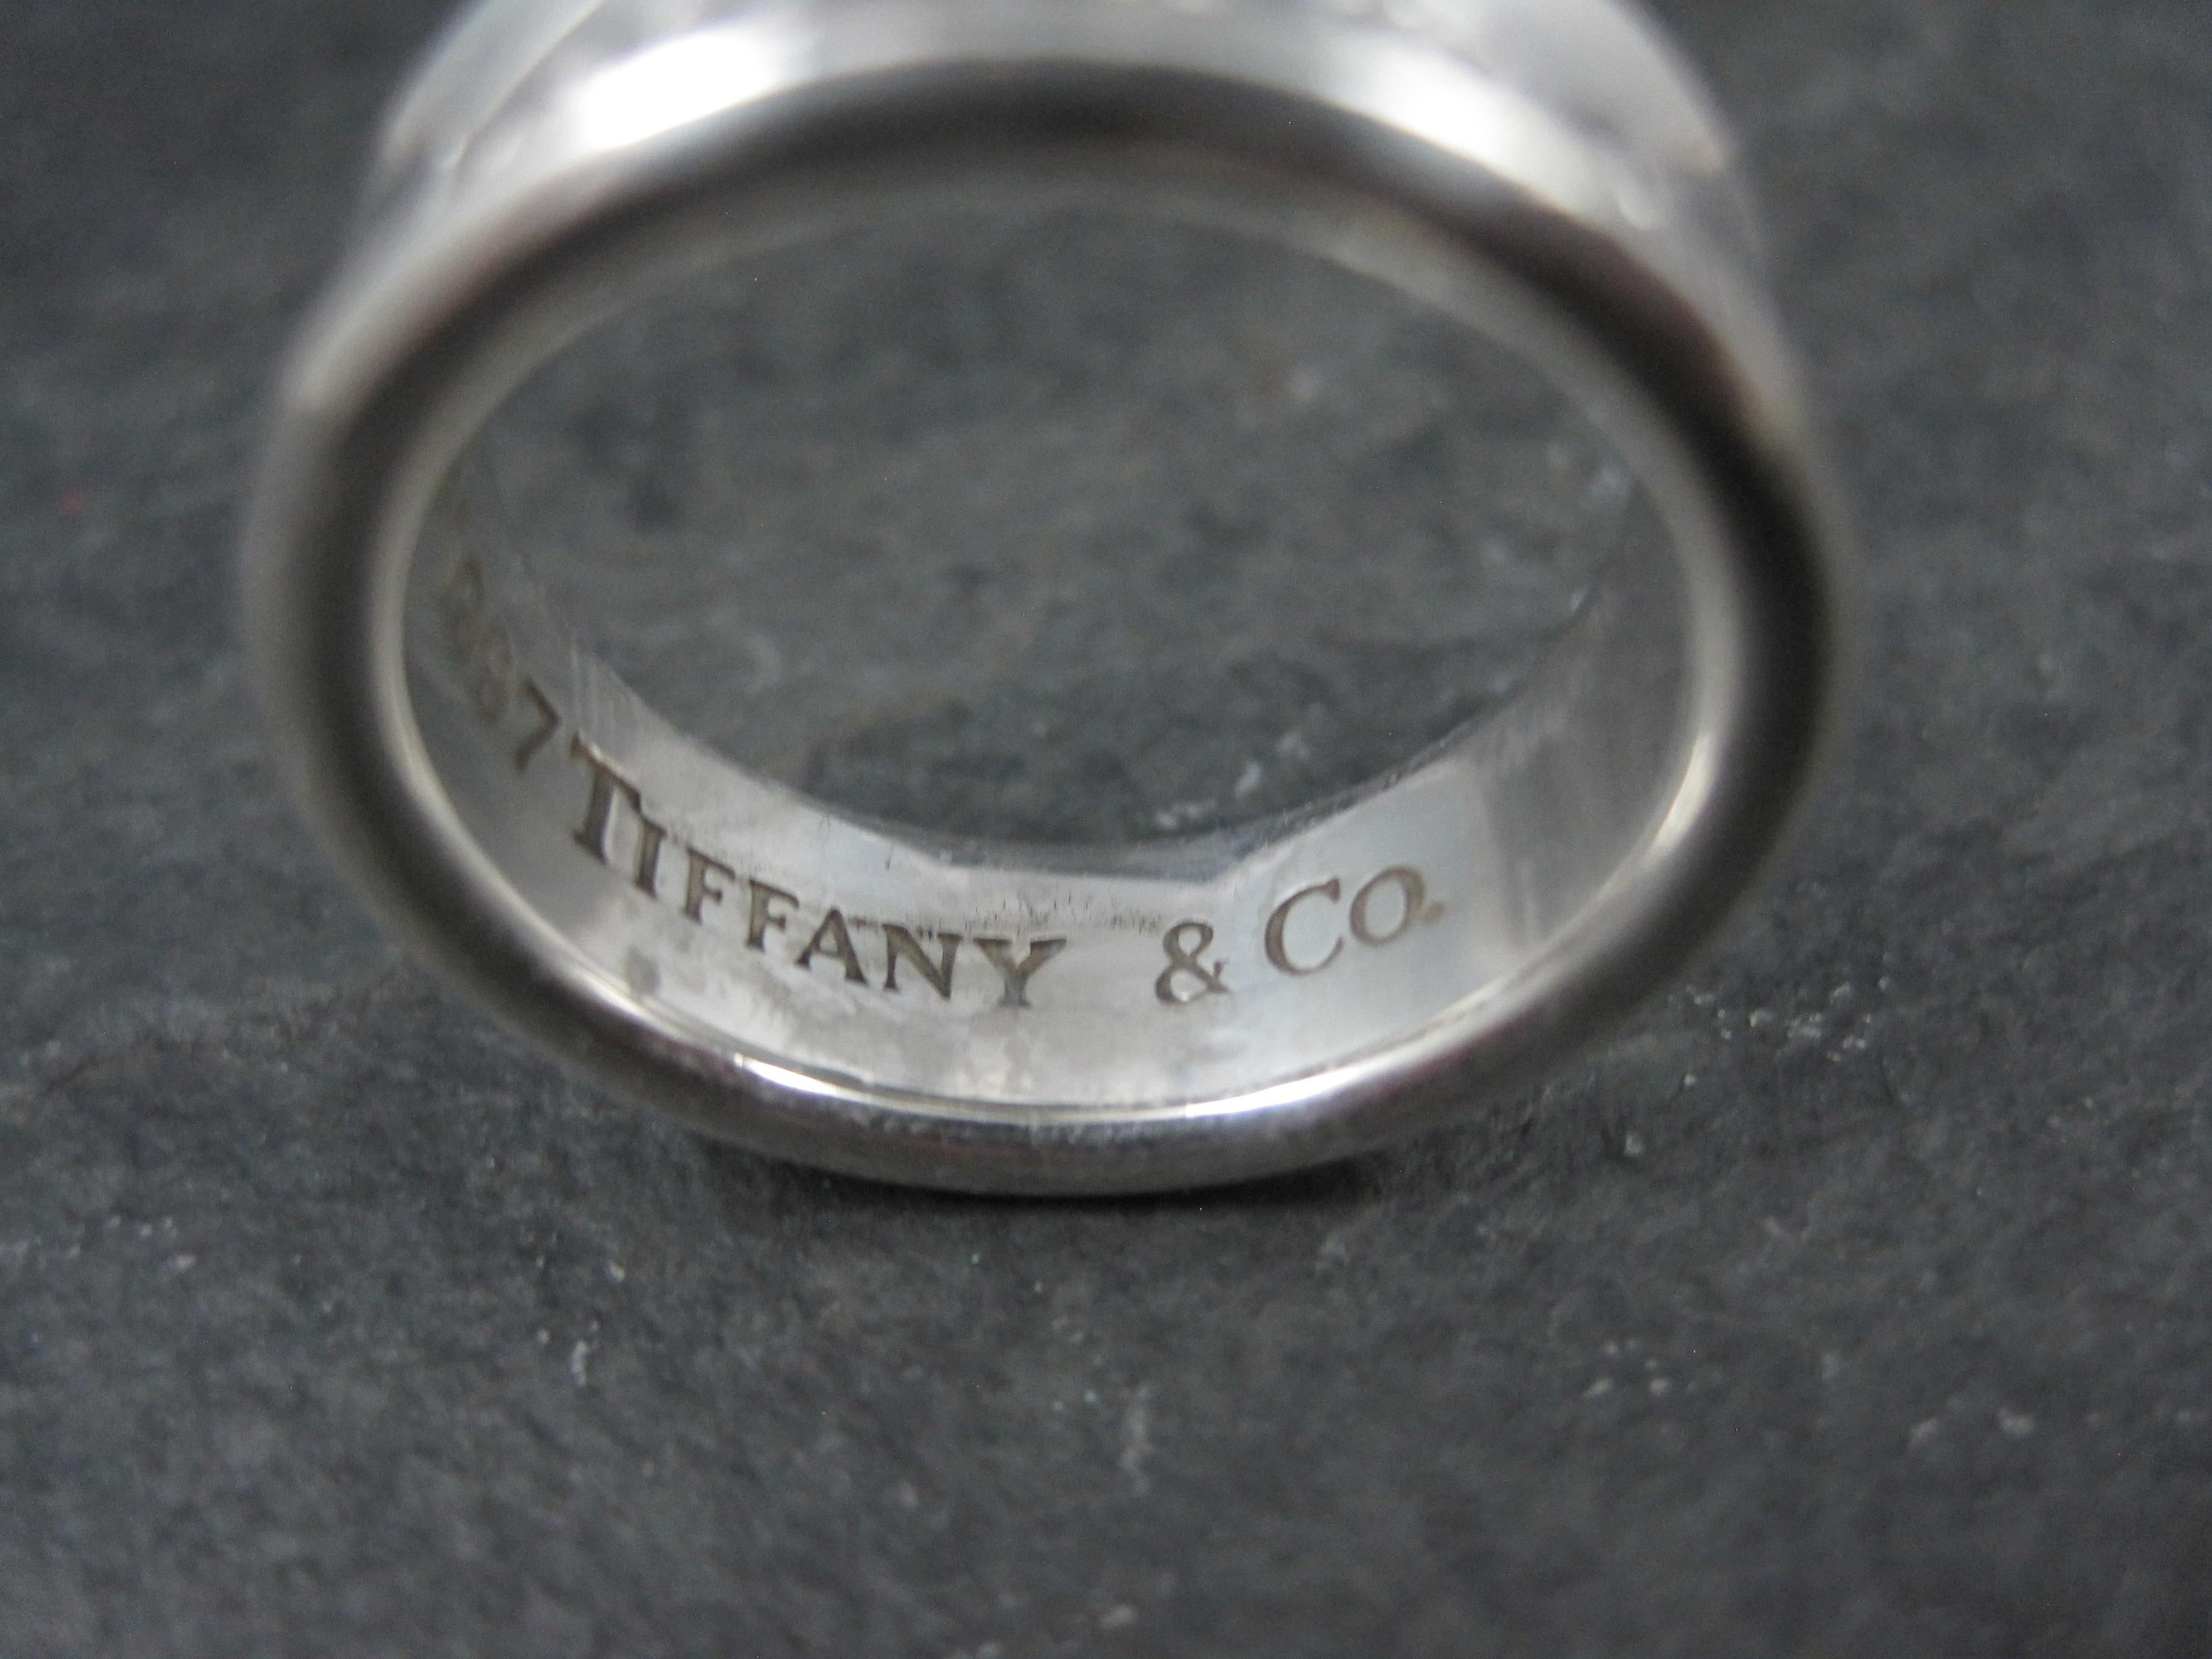 1997 Tiffany & Co 1837 Band Ring Sterling Silver Size 6.5 en vente 5